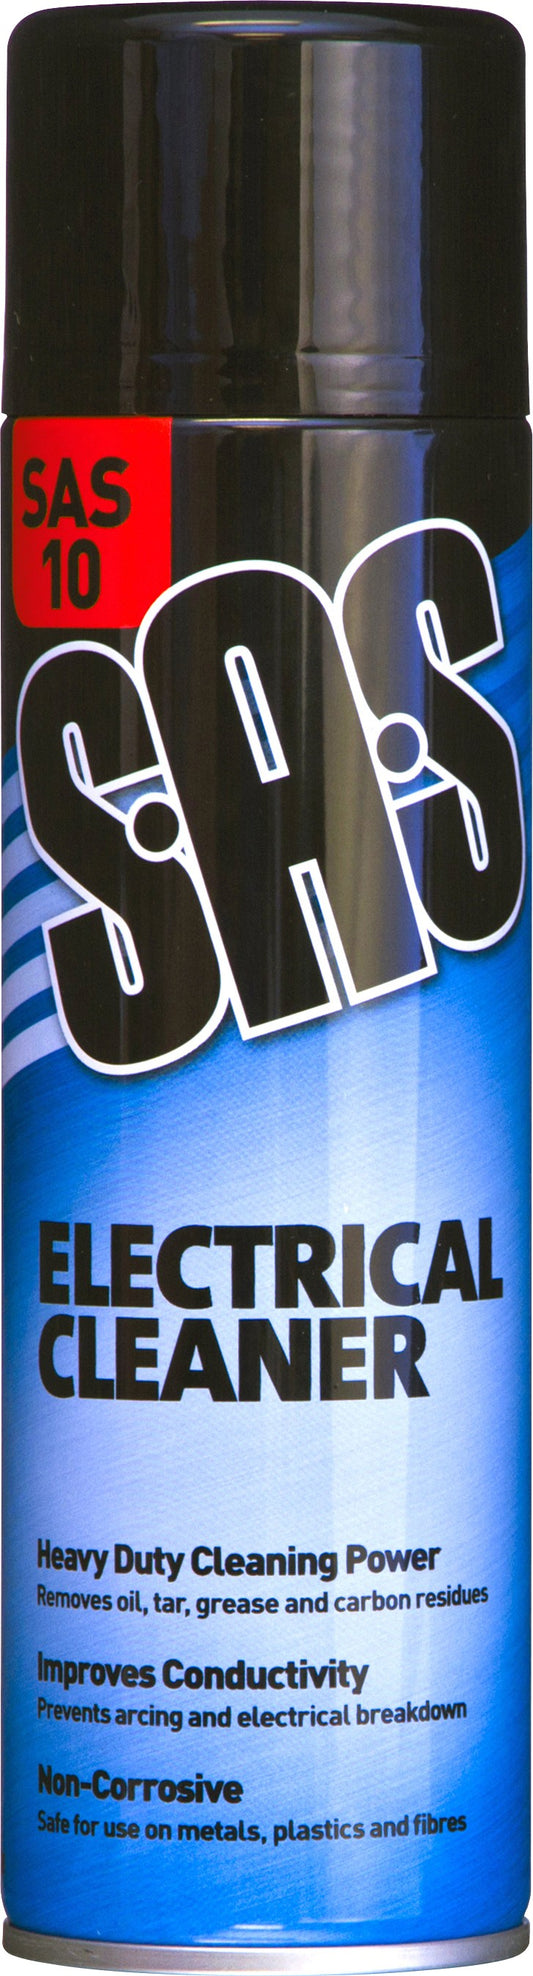 S.A.S Electrical / Contact Cleaner 500ml